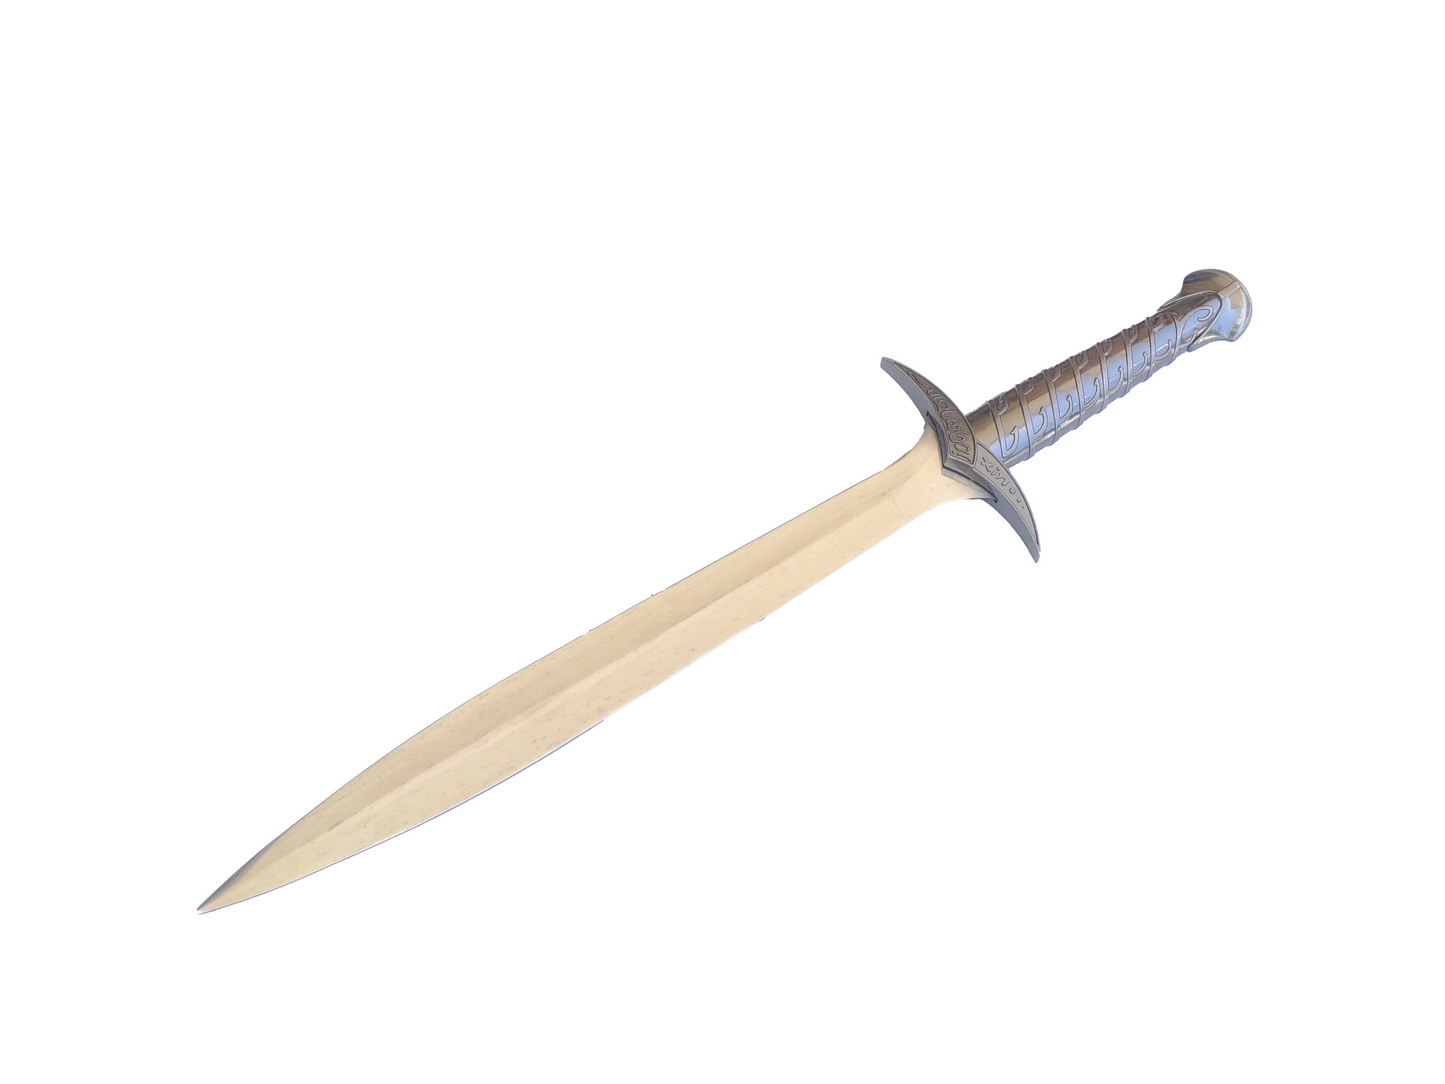 LORD OF THE RINGS STING SWORD WITH SCABBARD